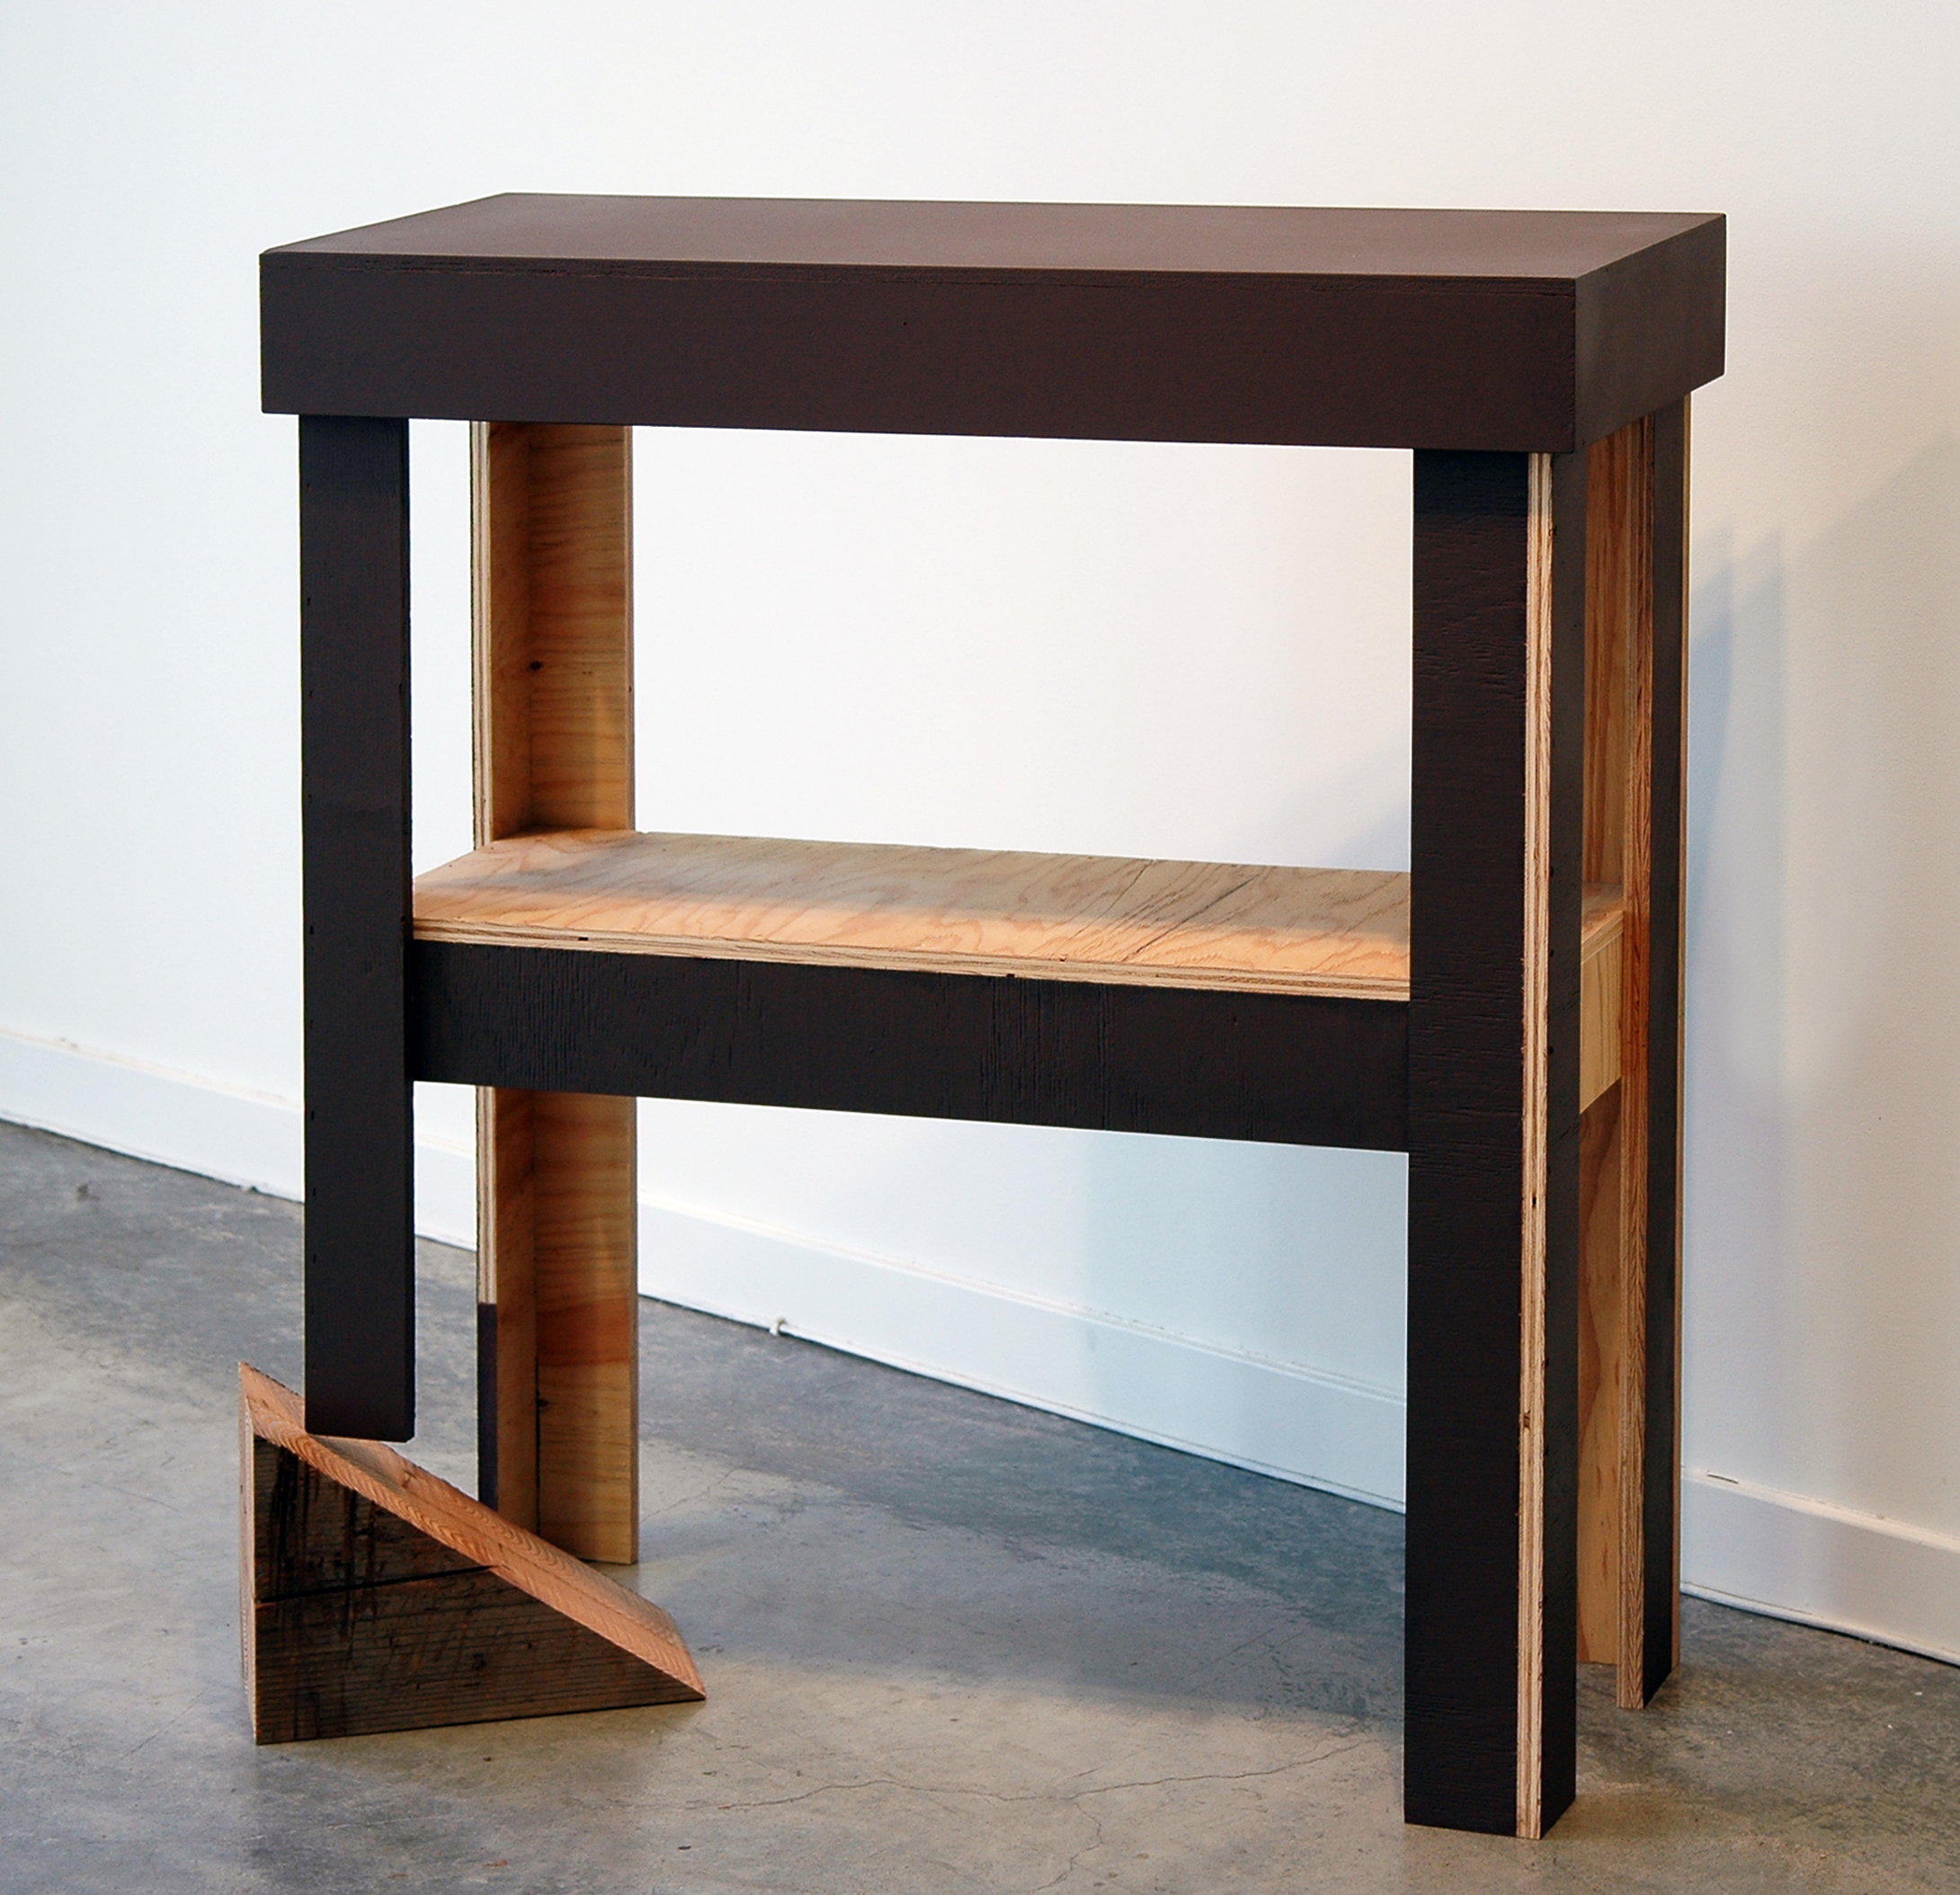   JOSHUA PIEPER   Table and Shim , plywood, shim and paint, 40.5" x 36.25" x 14.5", 2012 